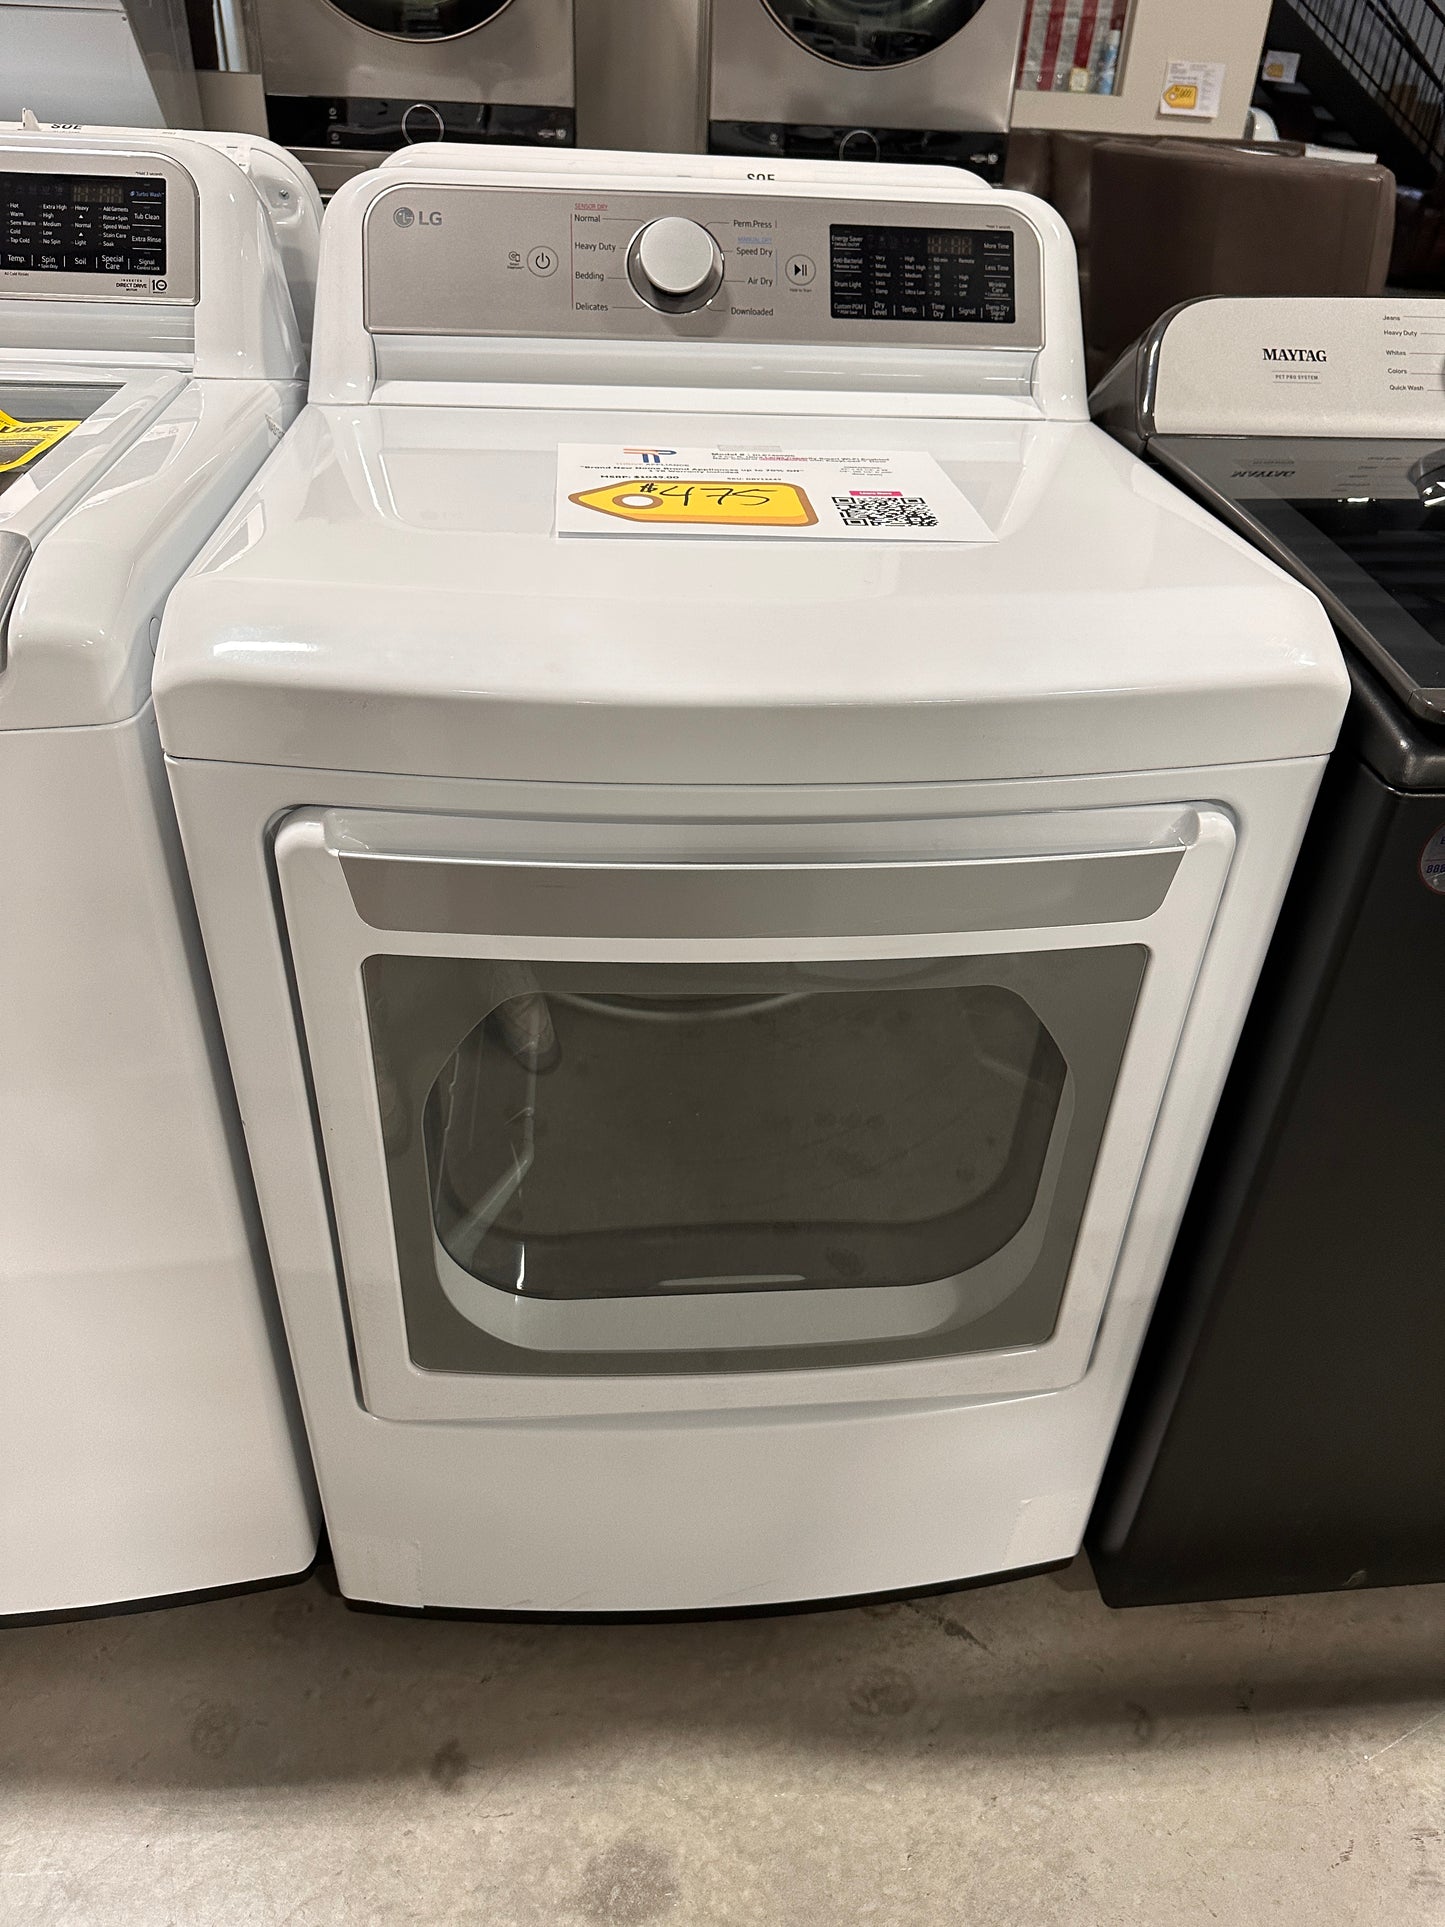 NEW LG SMART ELECTRIC DRYER 7.3 CU FT MODEL: DLE7400WE  DRY12449